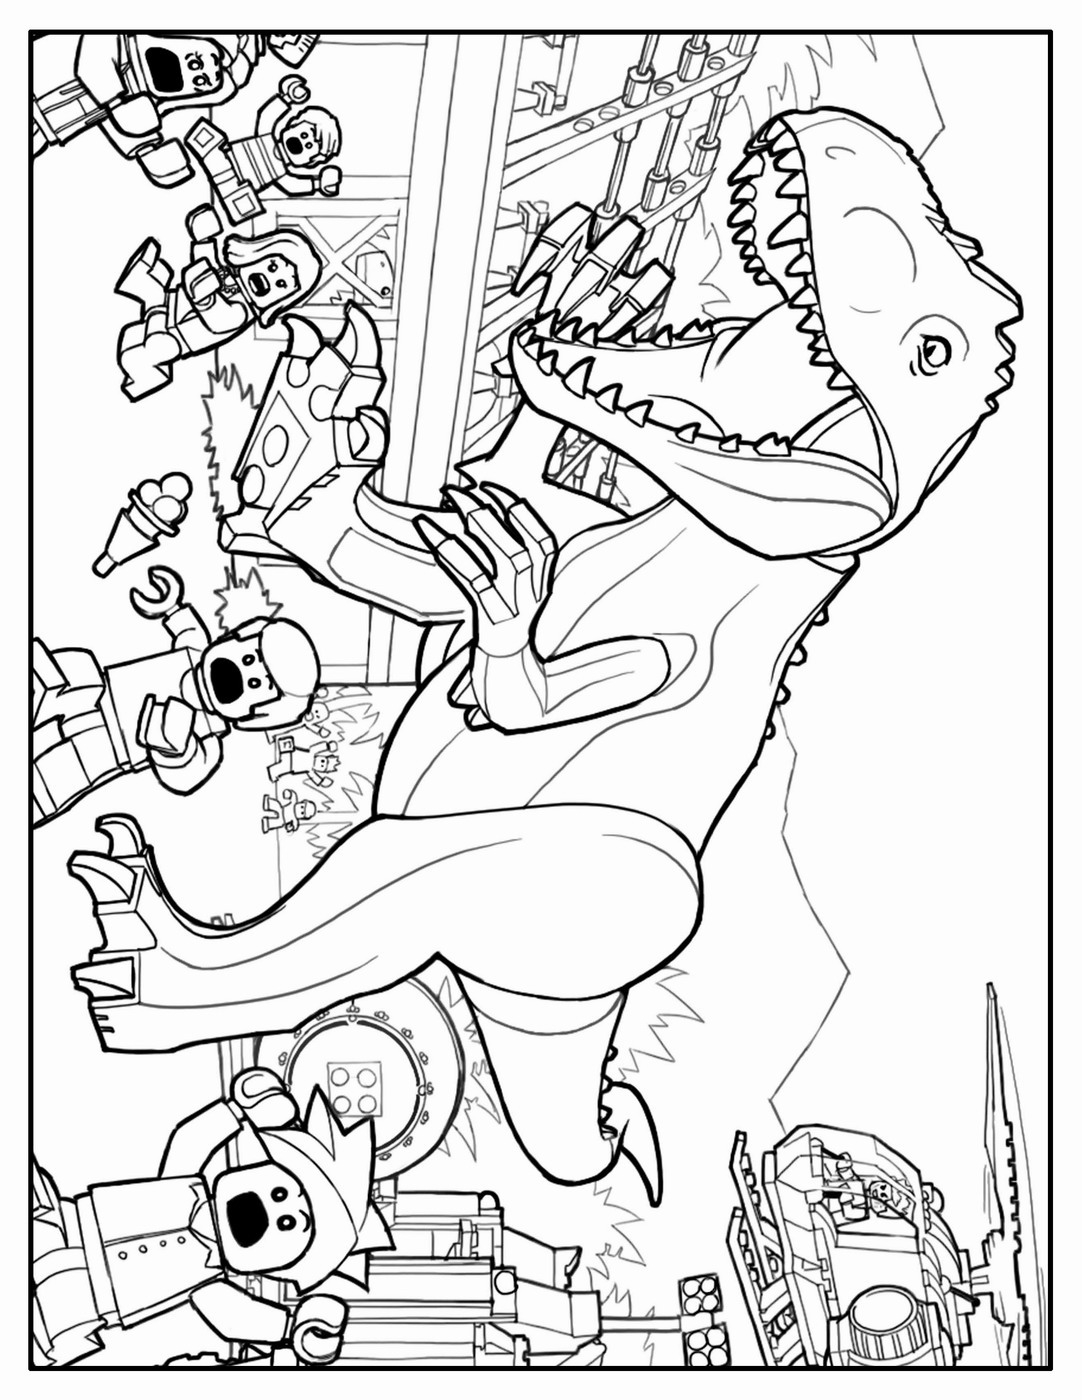 Lego Jurassic Park Coloring Pages at GetDrawings | Free download